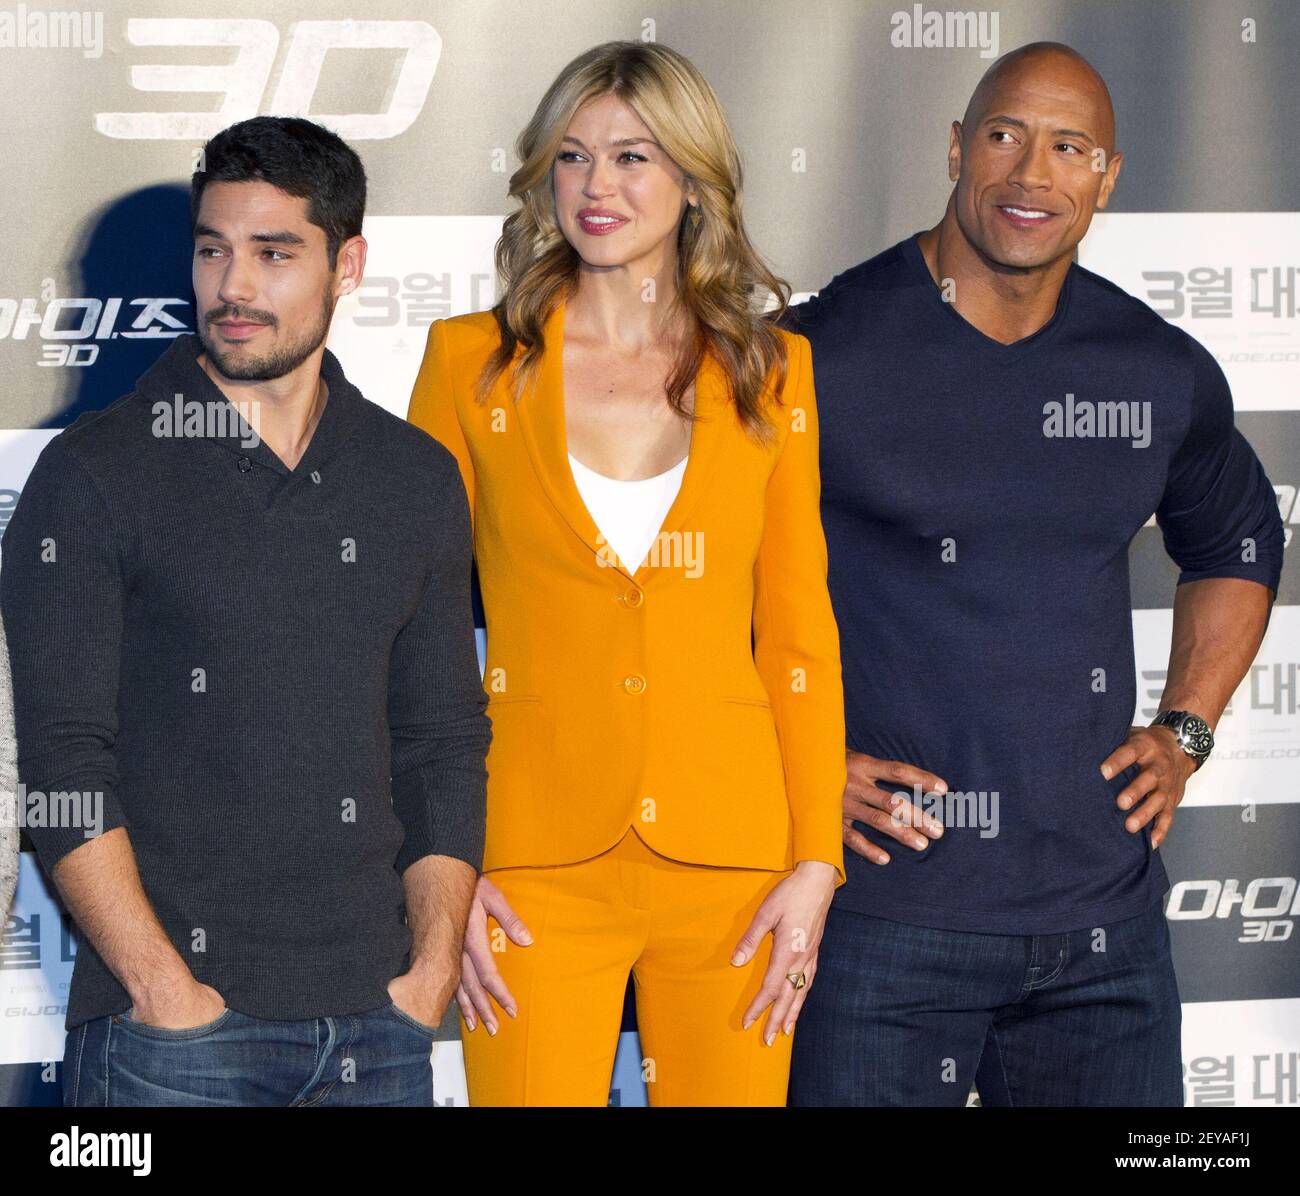 (L to R) Actor D.J. Cotrona, actress Adrianne Palicki and actor Dwayne Johnson attend a press conference for the movie 'G. I. Joe:Retaliation' World premier at hotel in Seoul, South Korea on March 11, 2013. The movie is to be released in South Korea on March 28. Photo Credit: Lee Young-ho/Sipa USA Stock Photo